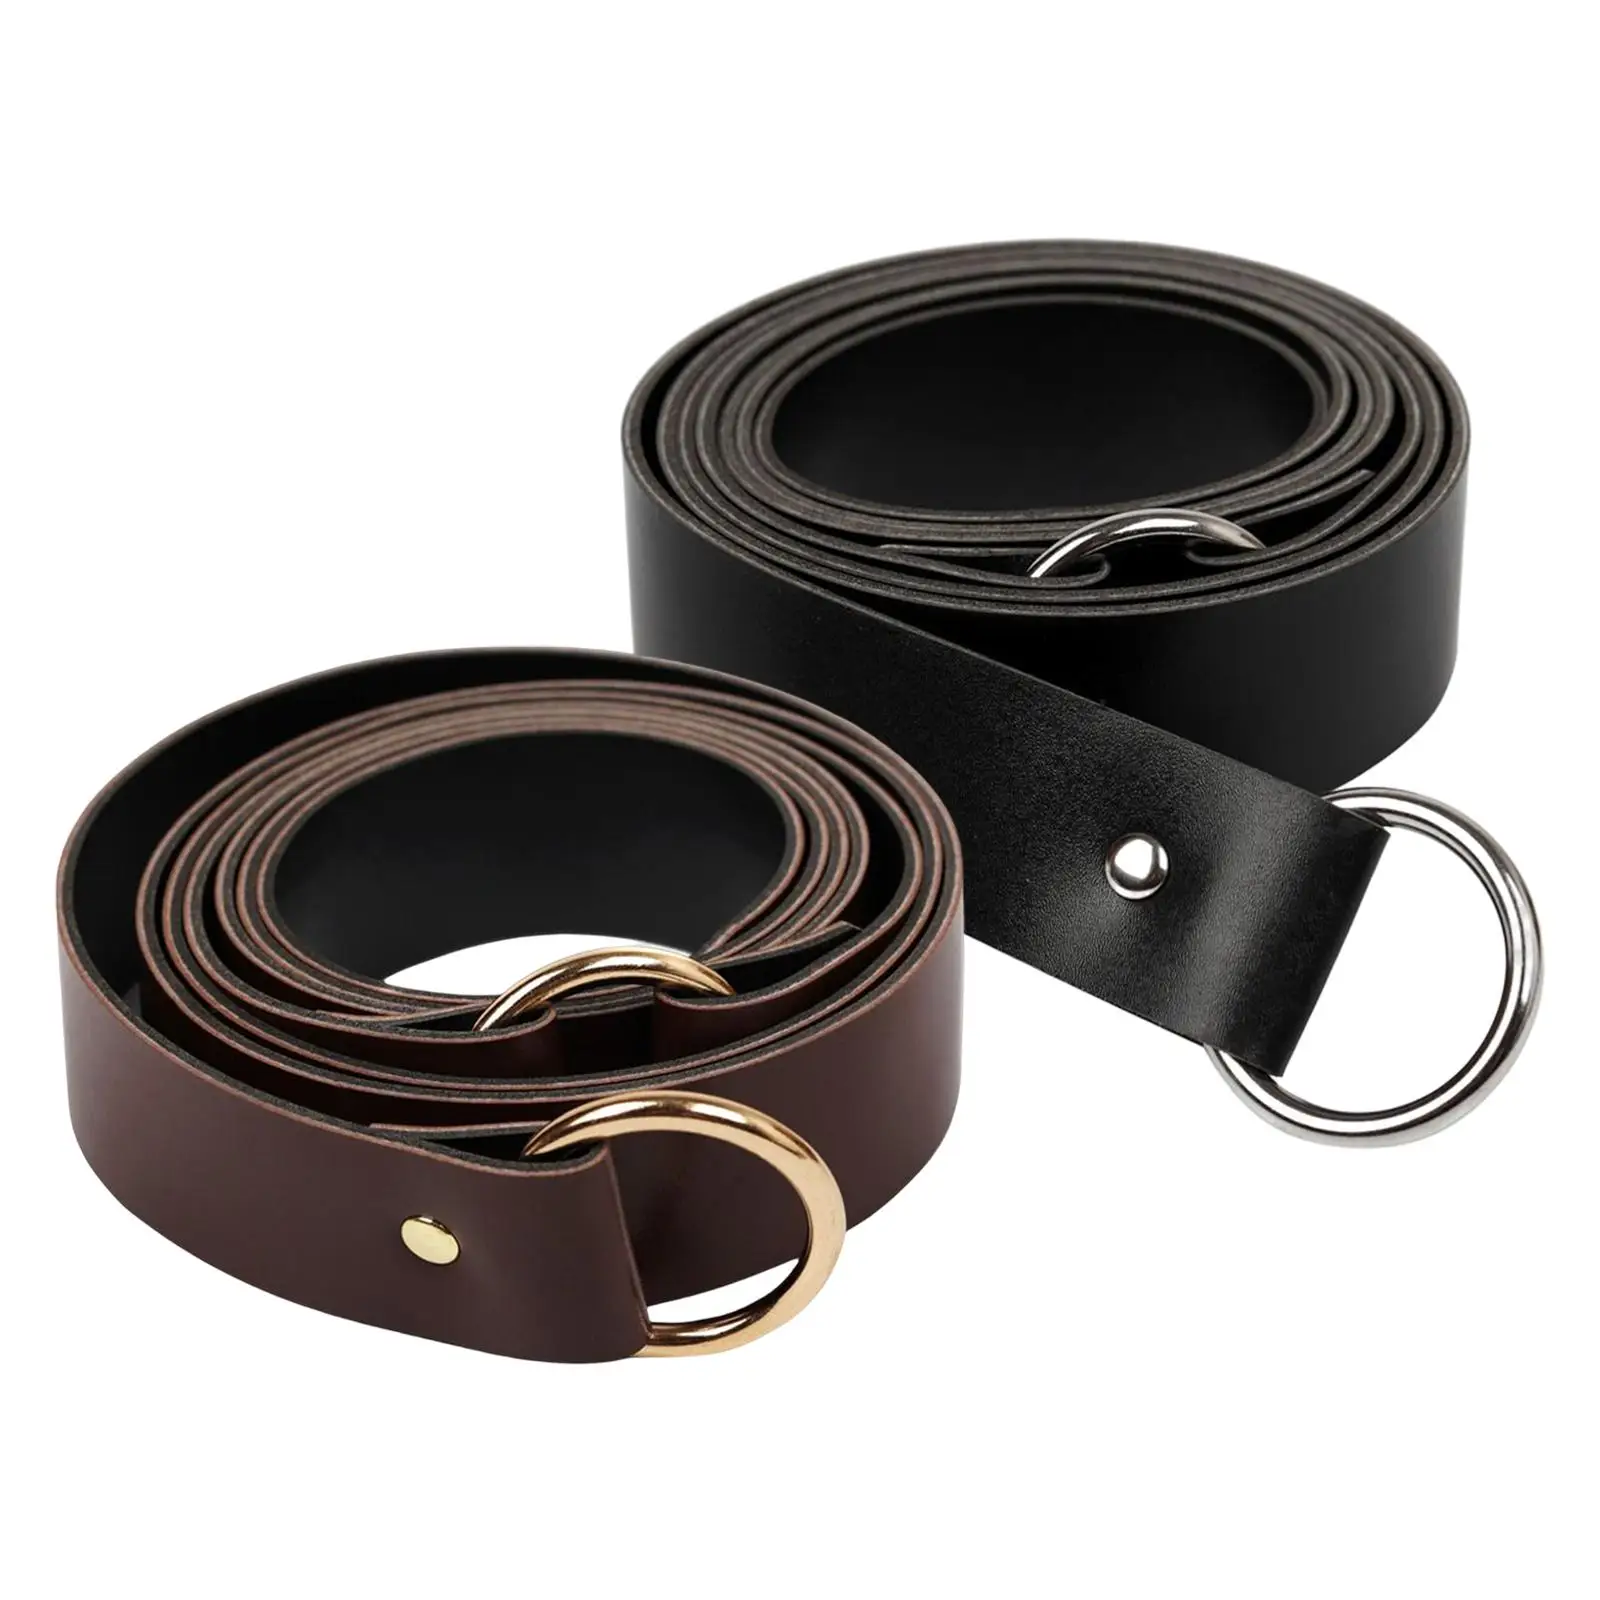 Medieval O Belt PU Fashion Decoration for Shirts Parties Women